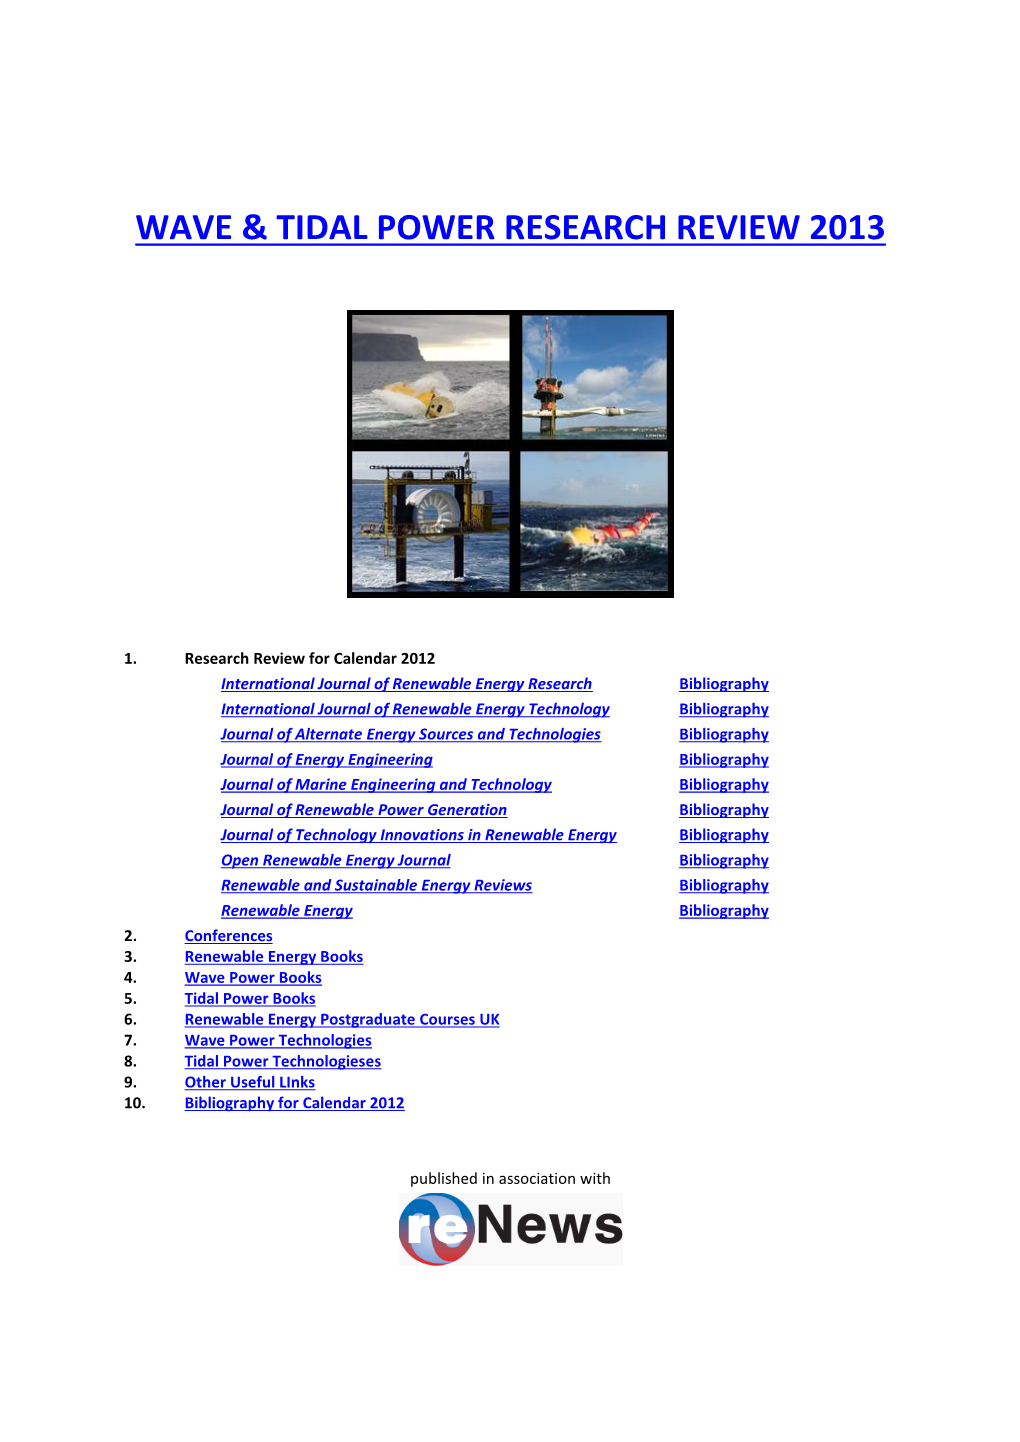 Wave & Tidal Power Research Review 2013